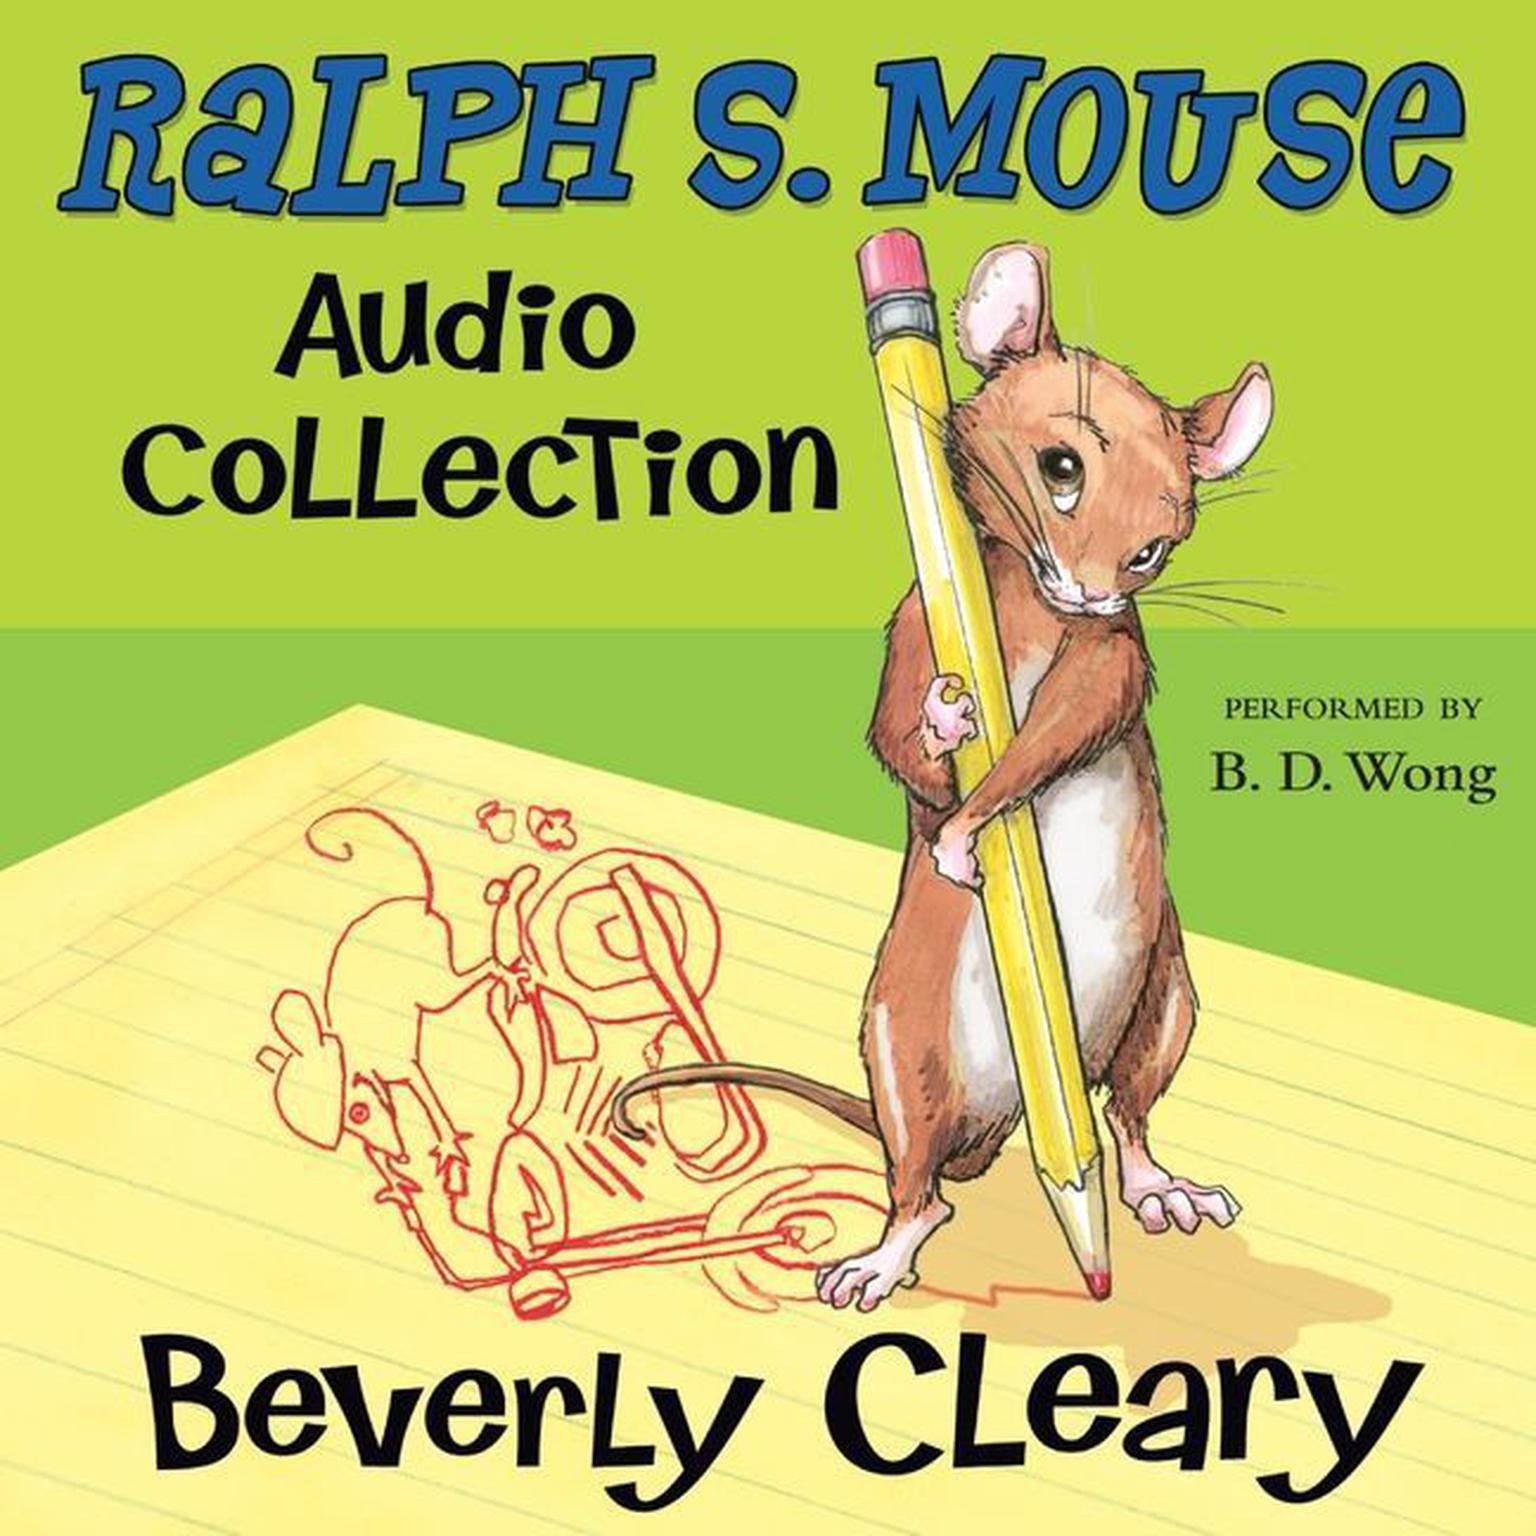 The Ralph S. Mouse Audio Collection Audiobook, by Beverly Cleary